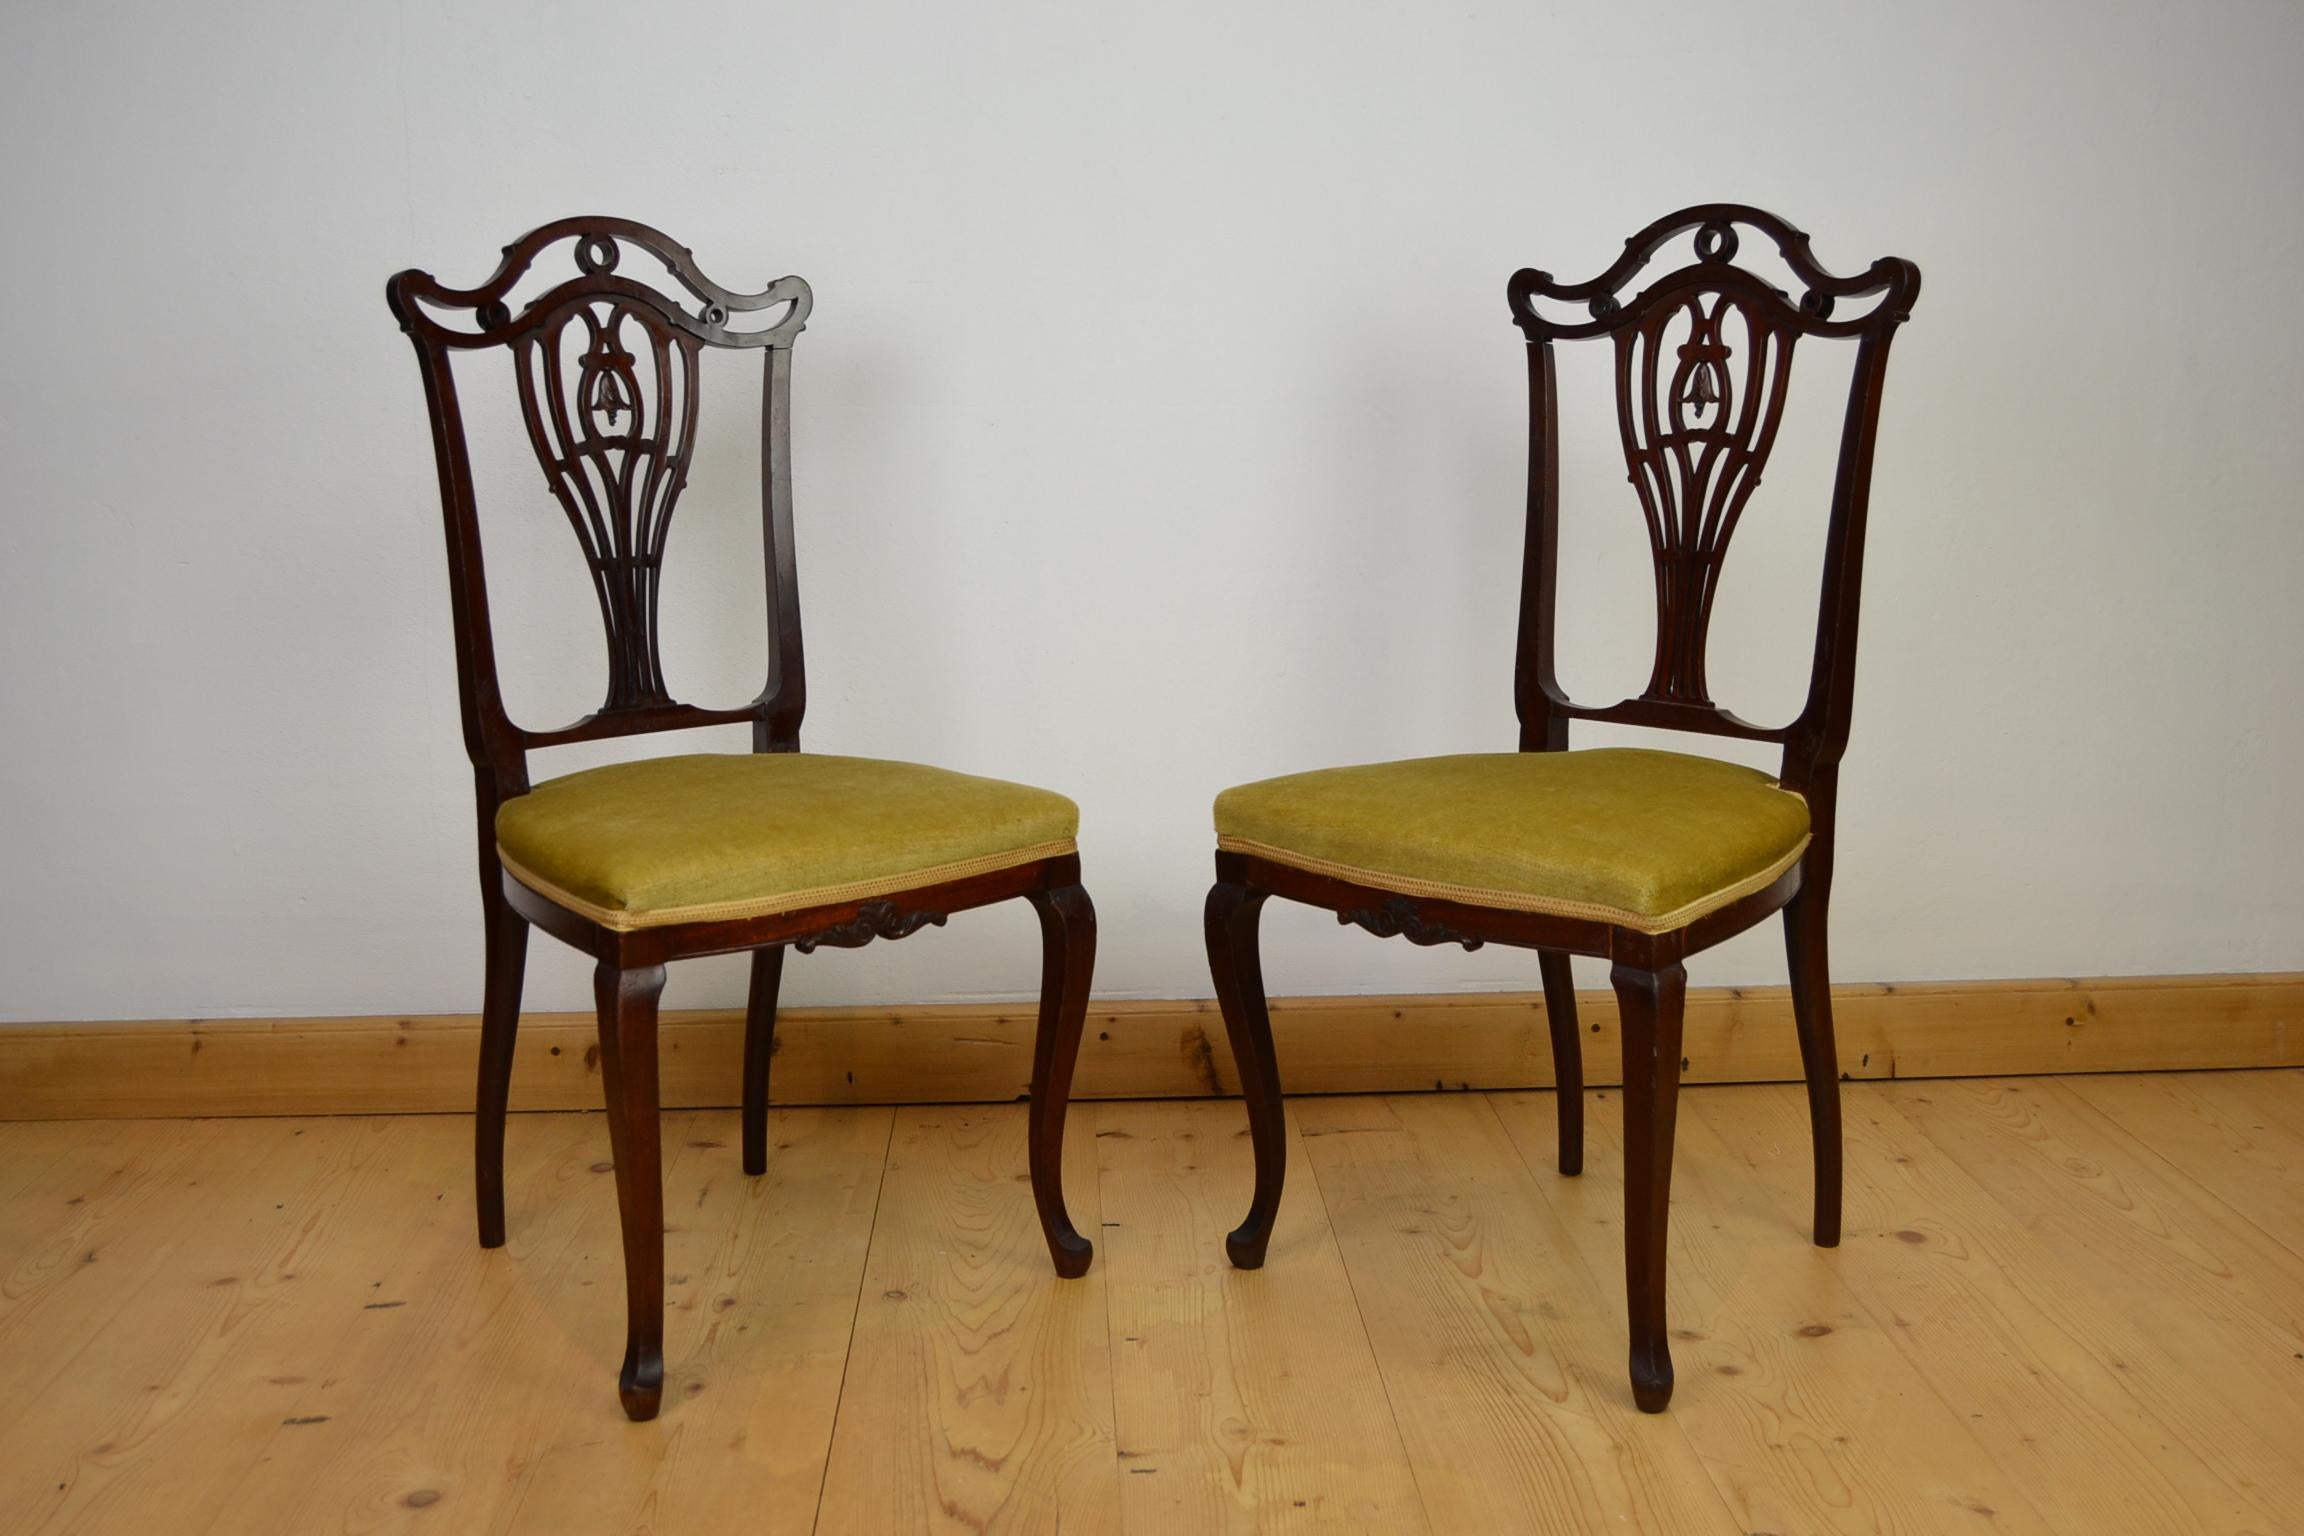 Hollandia Pander & Zn Pair of Side Chairs, Late 19th Century For Sale 14